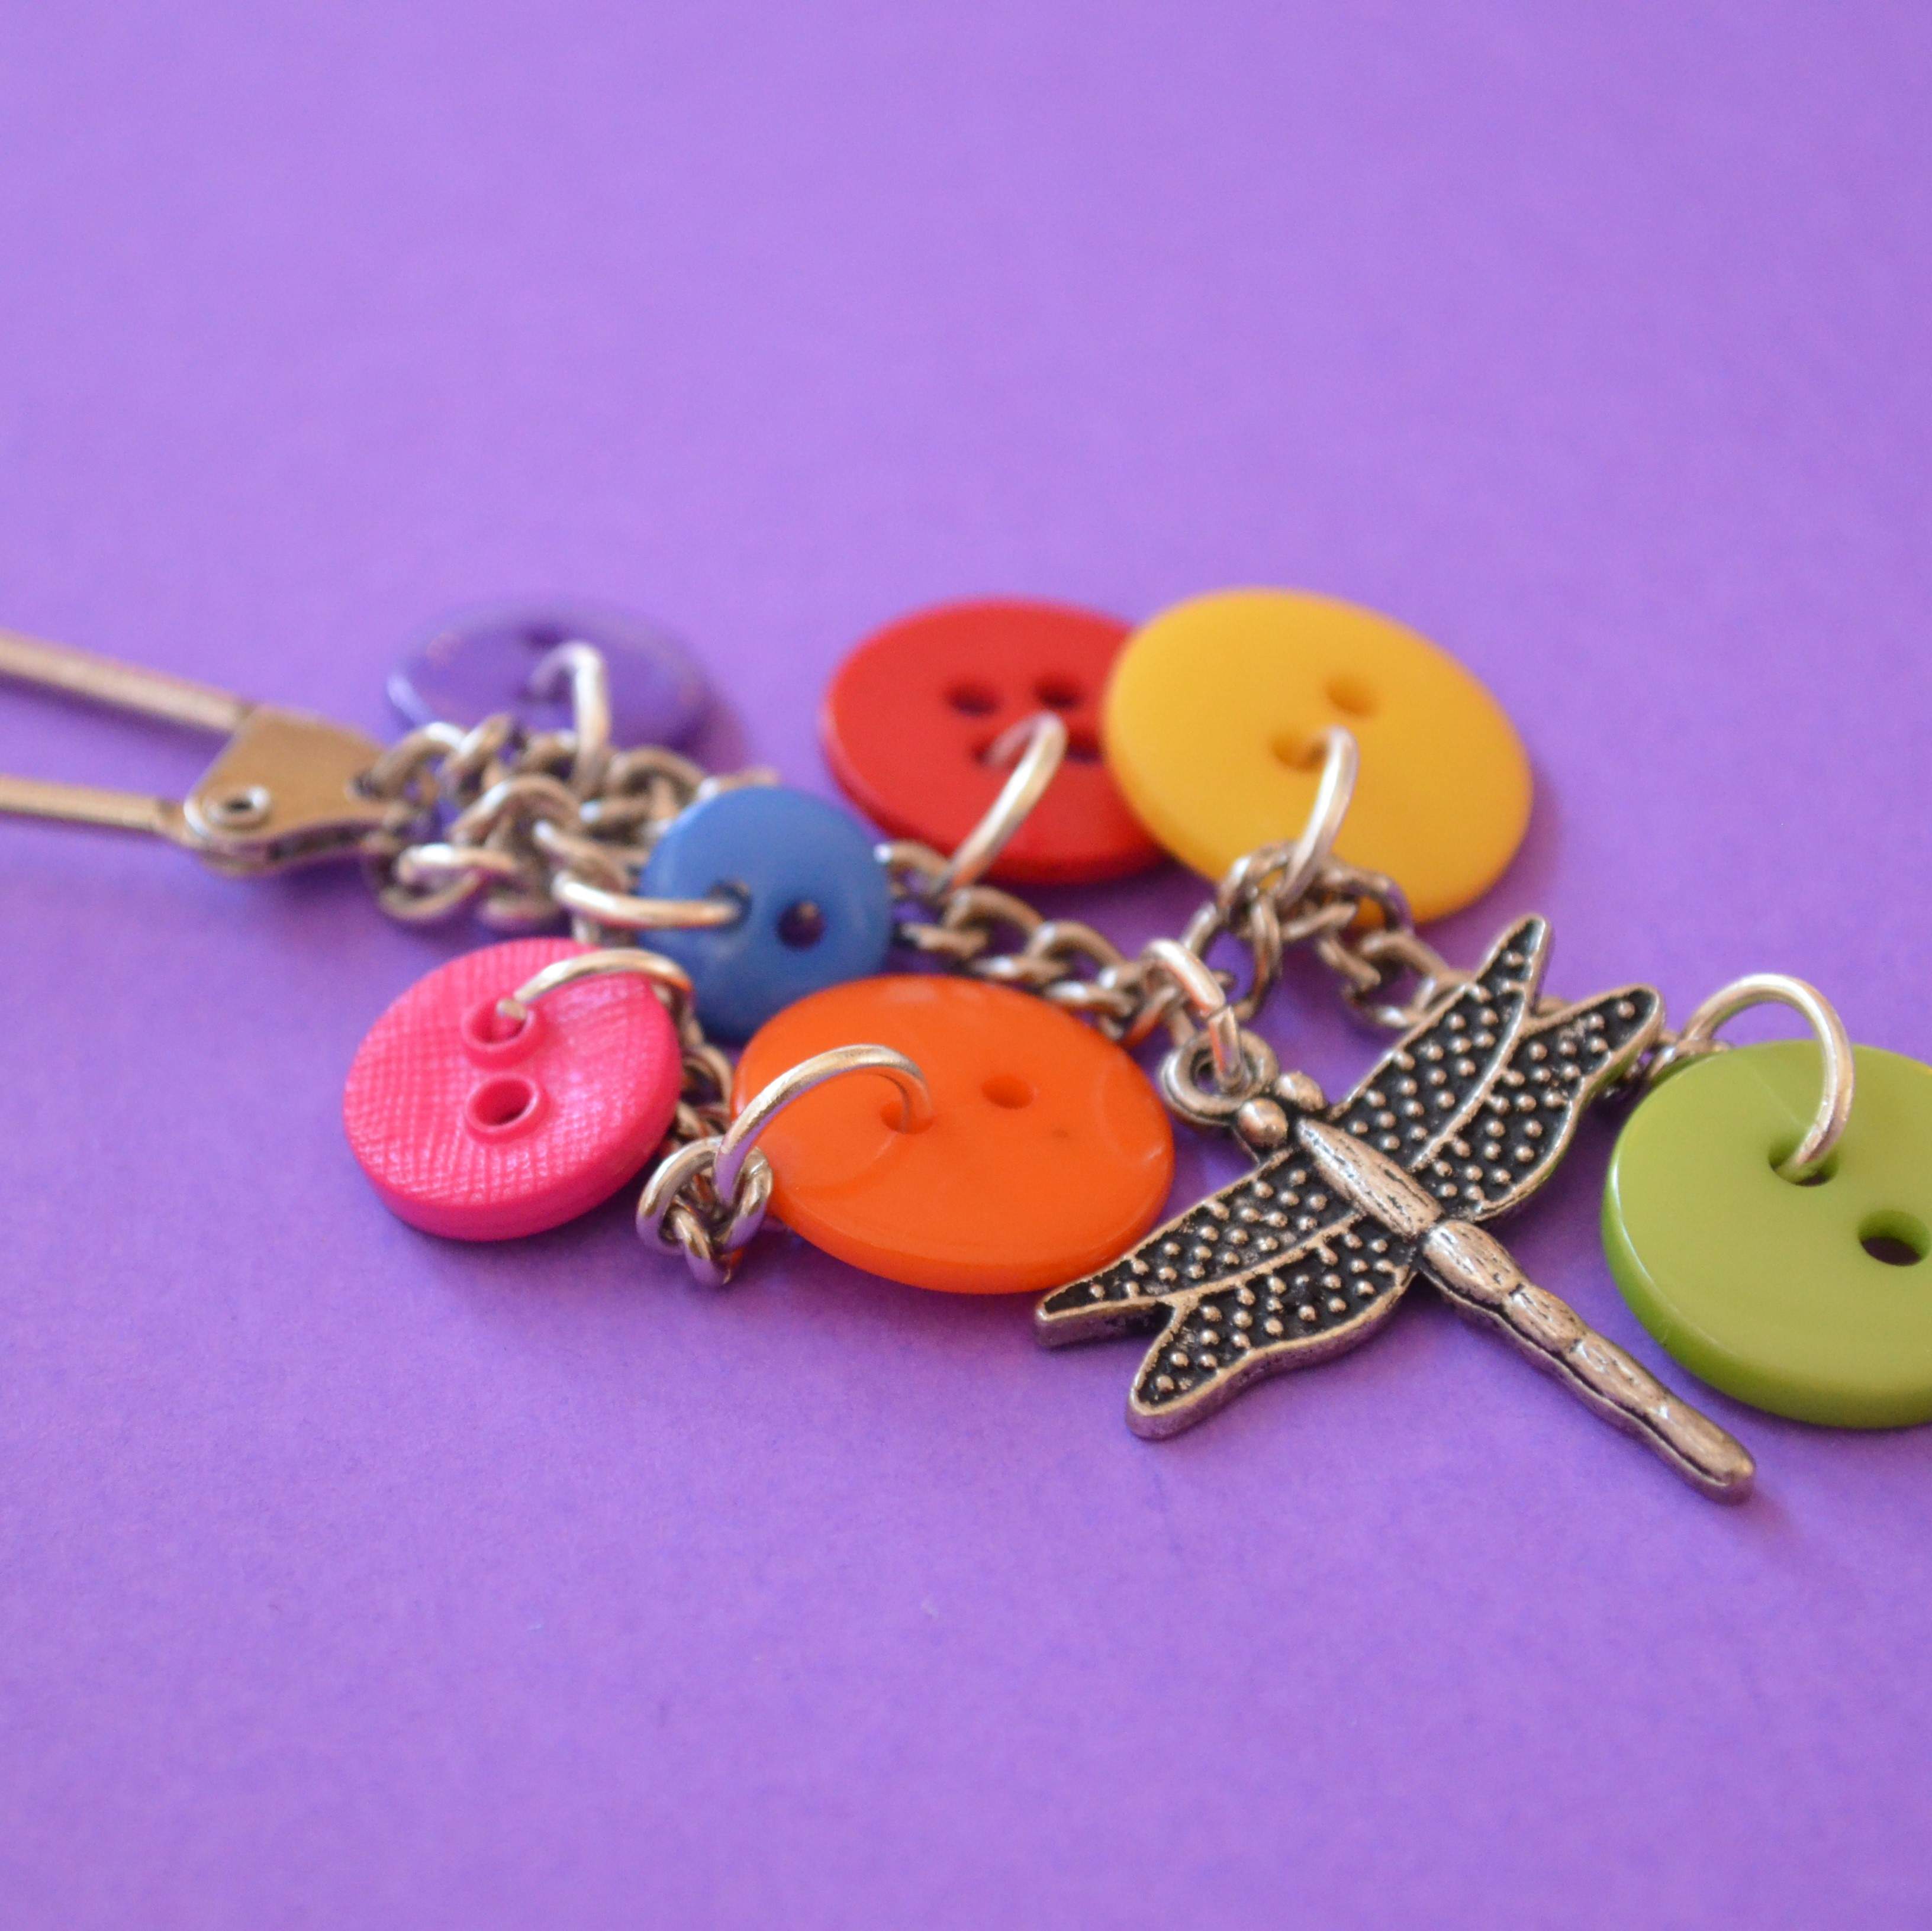 Insect Wee Cluster Bag Charm Keyring